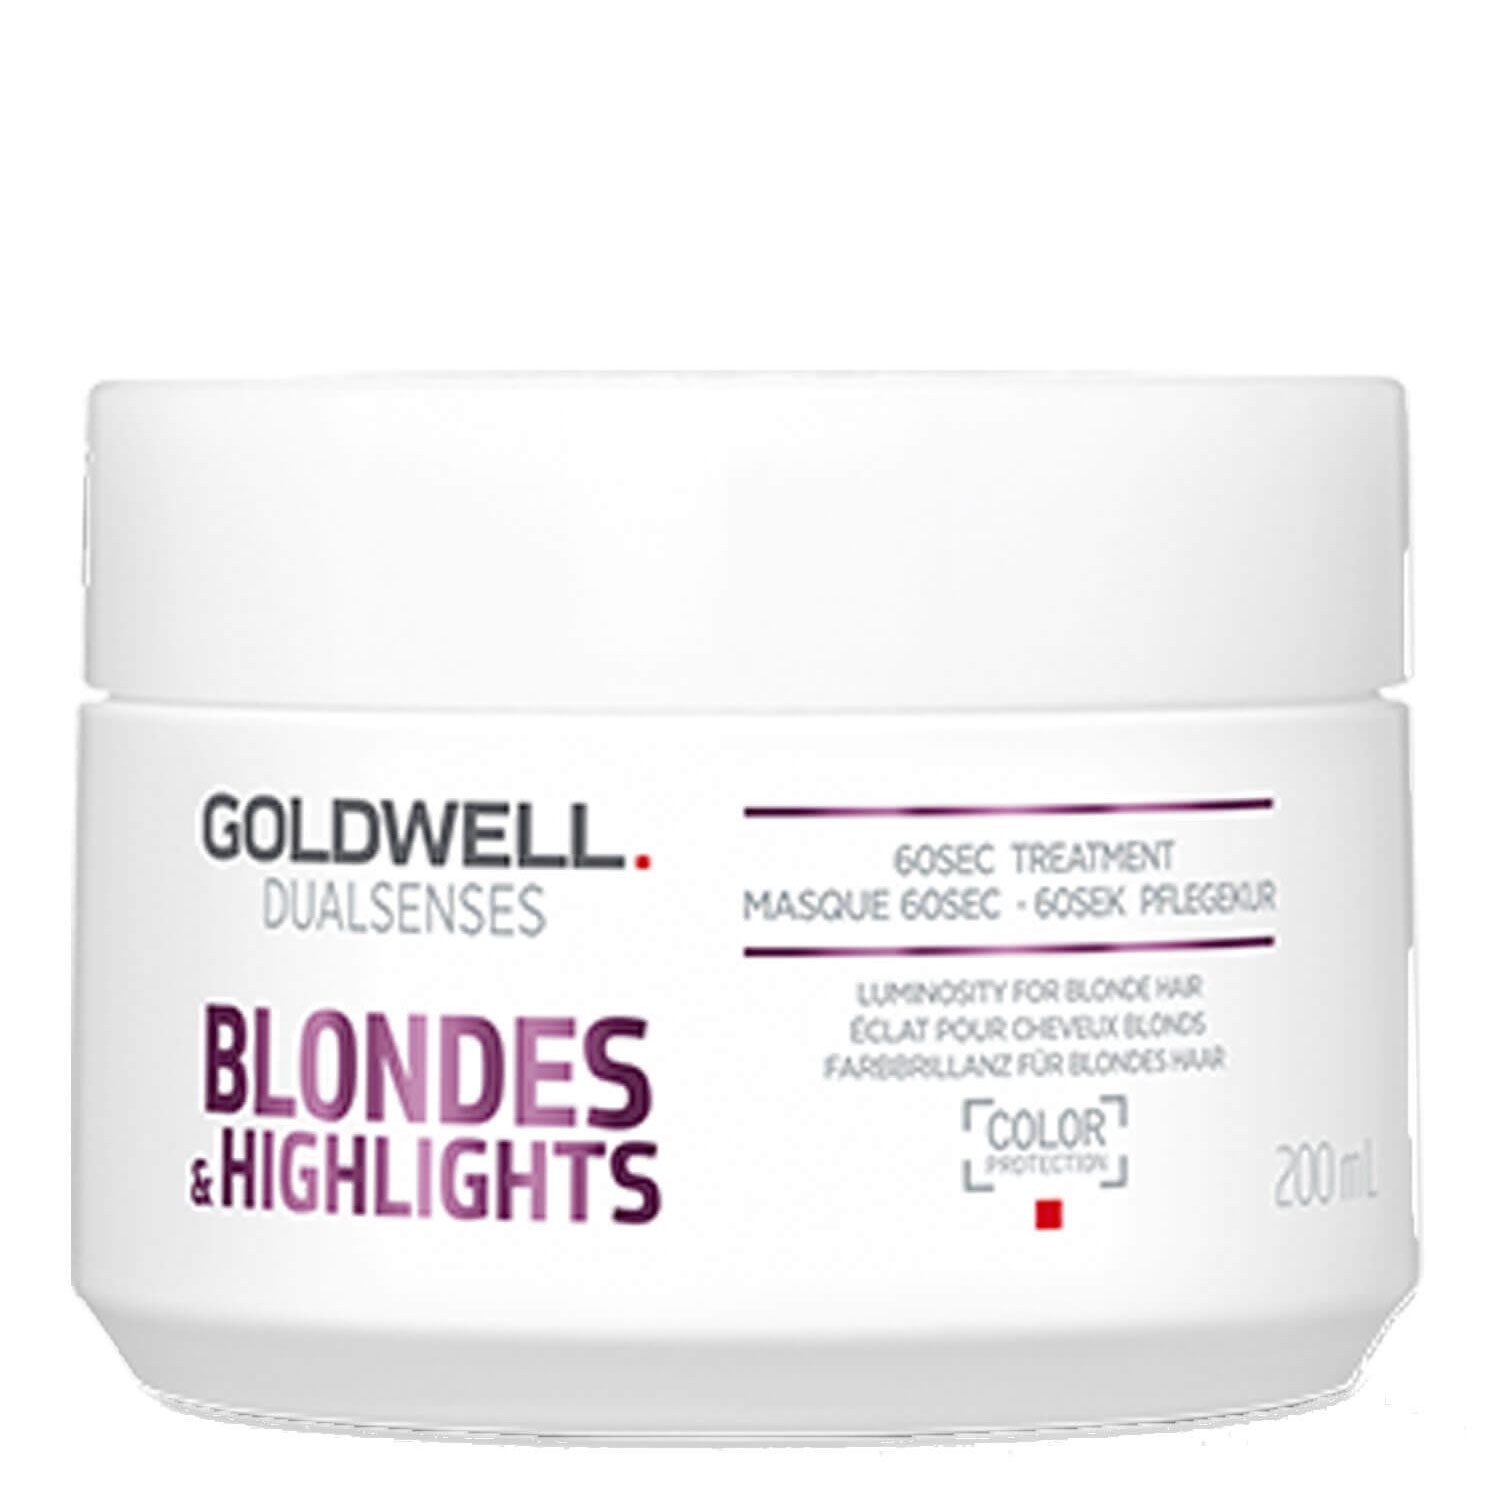 Product image from Dualsenses Blondes & Highlights - 60s Treatment